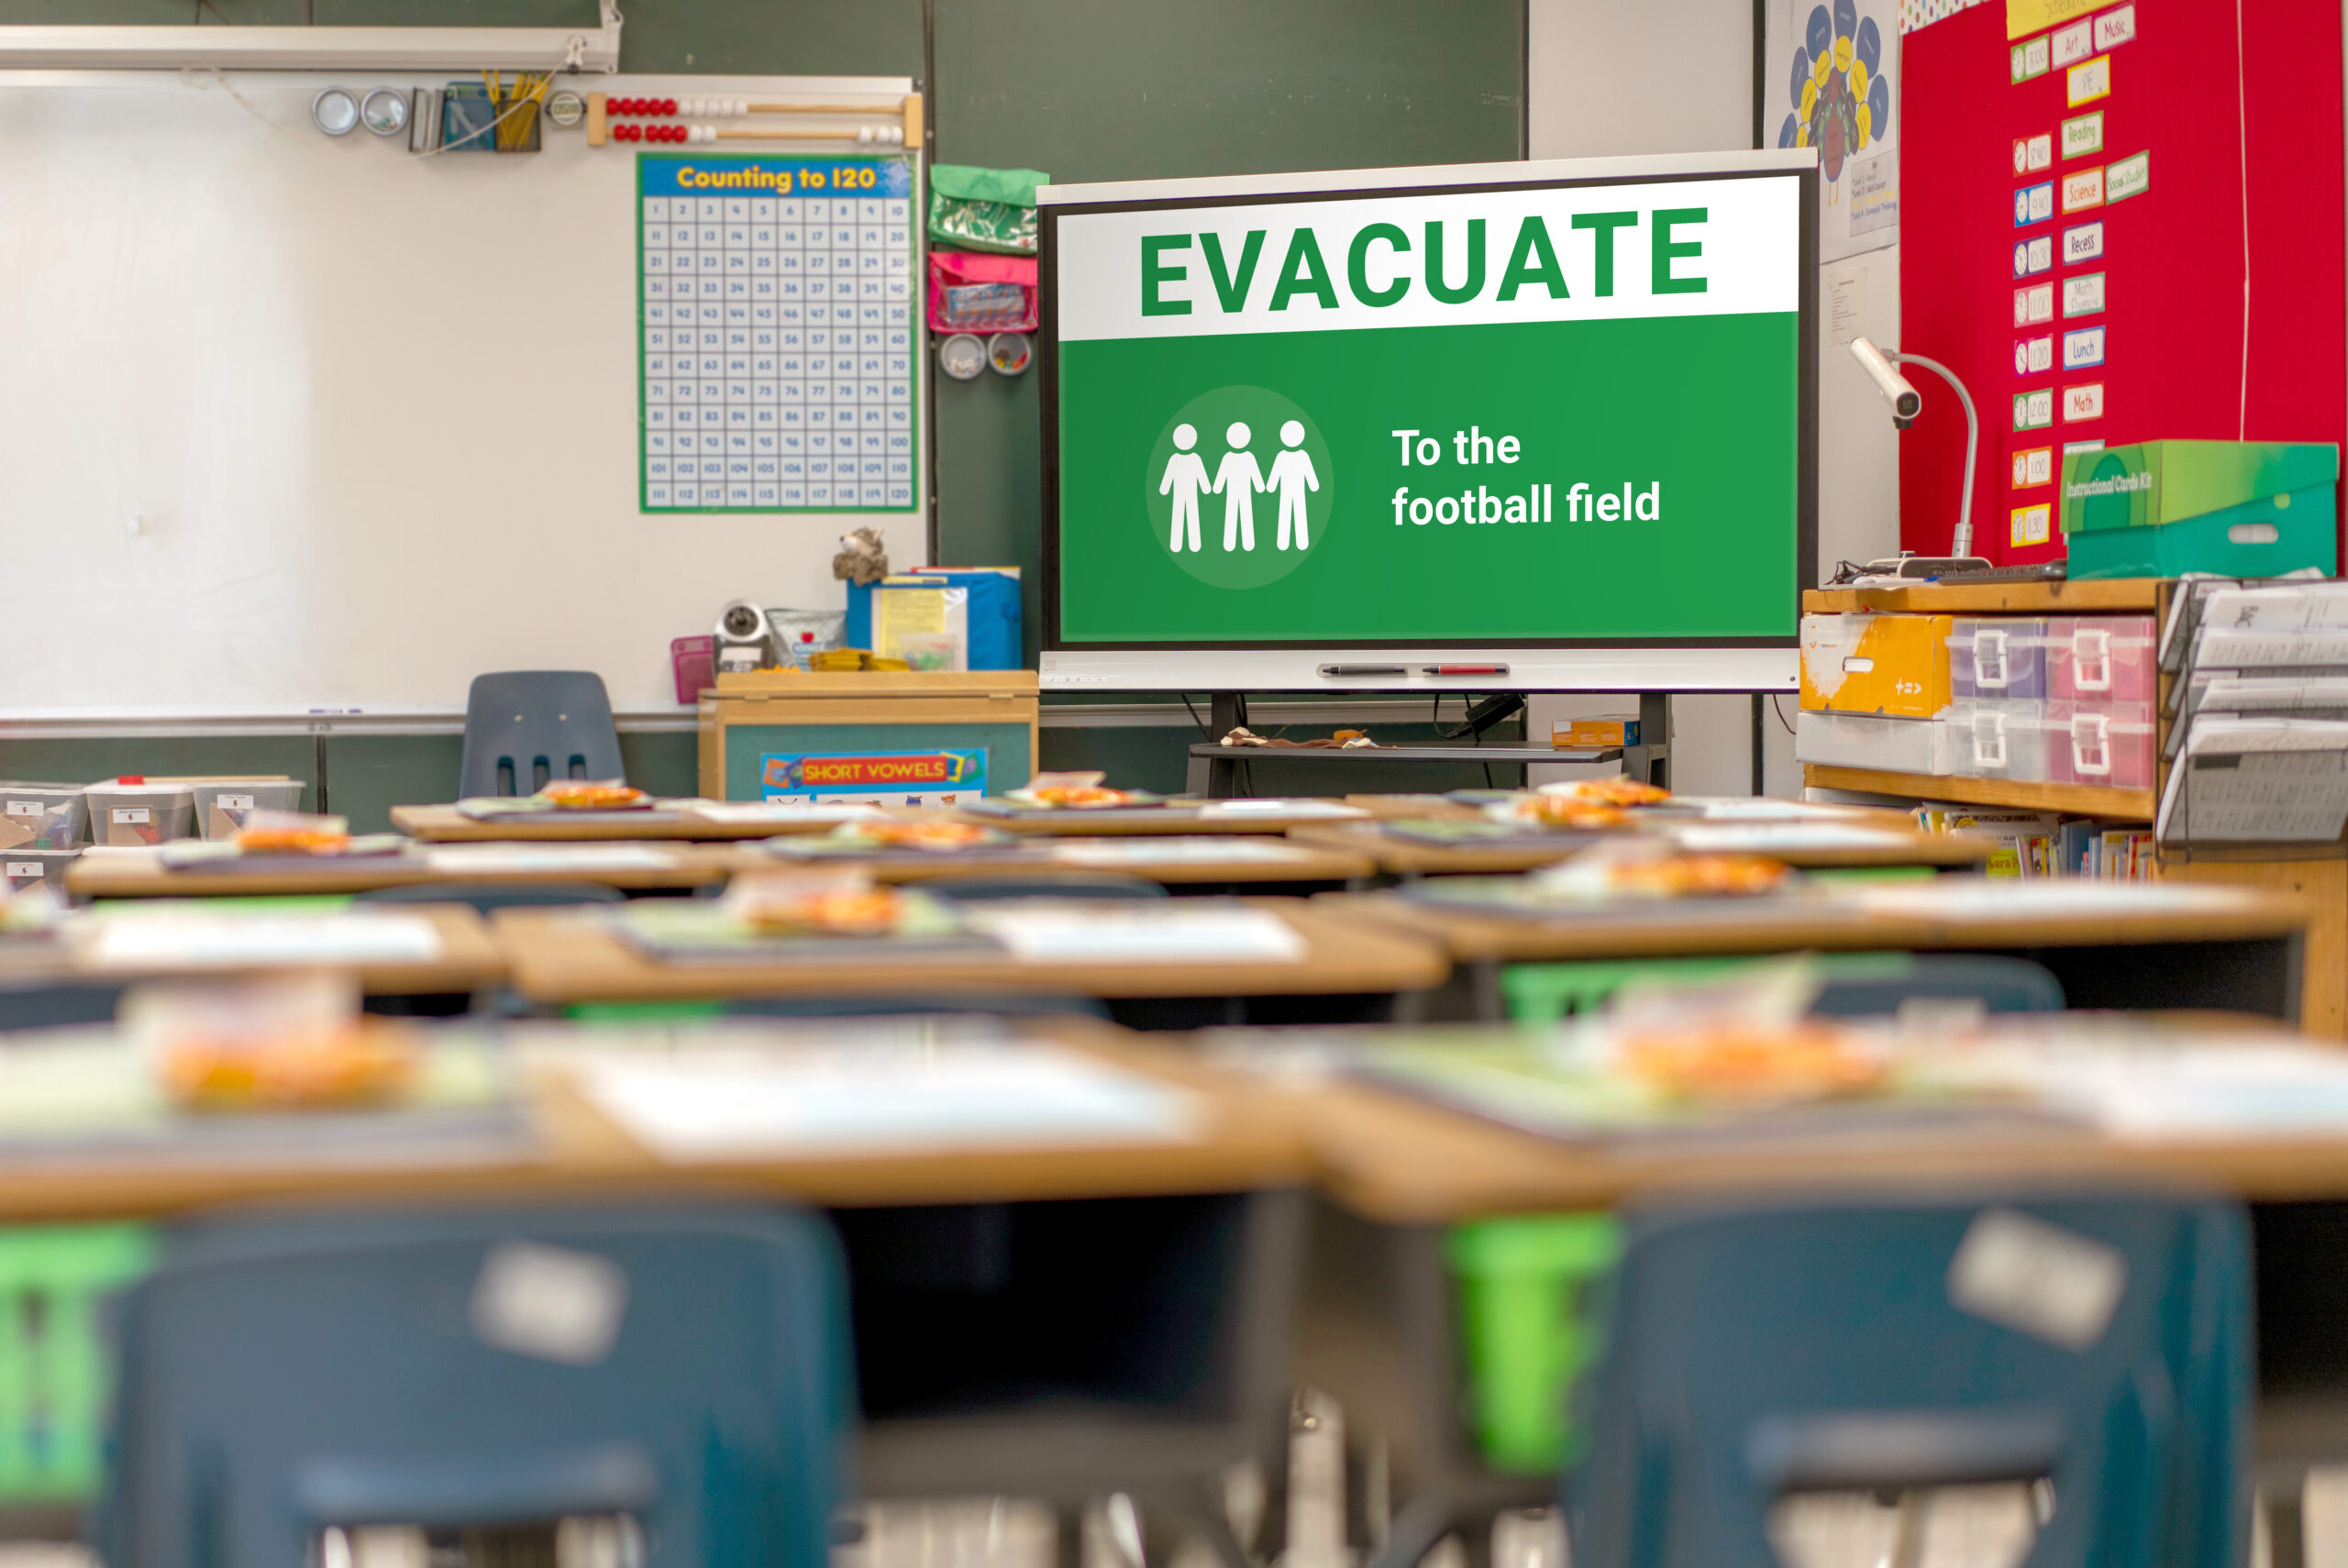 Classroom emergency evacuation alert displayed on a screen, instructing students to evacuate to the football field, with student desks and educational materials in the foreground.